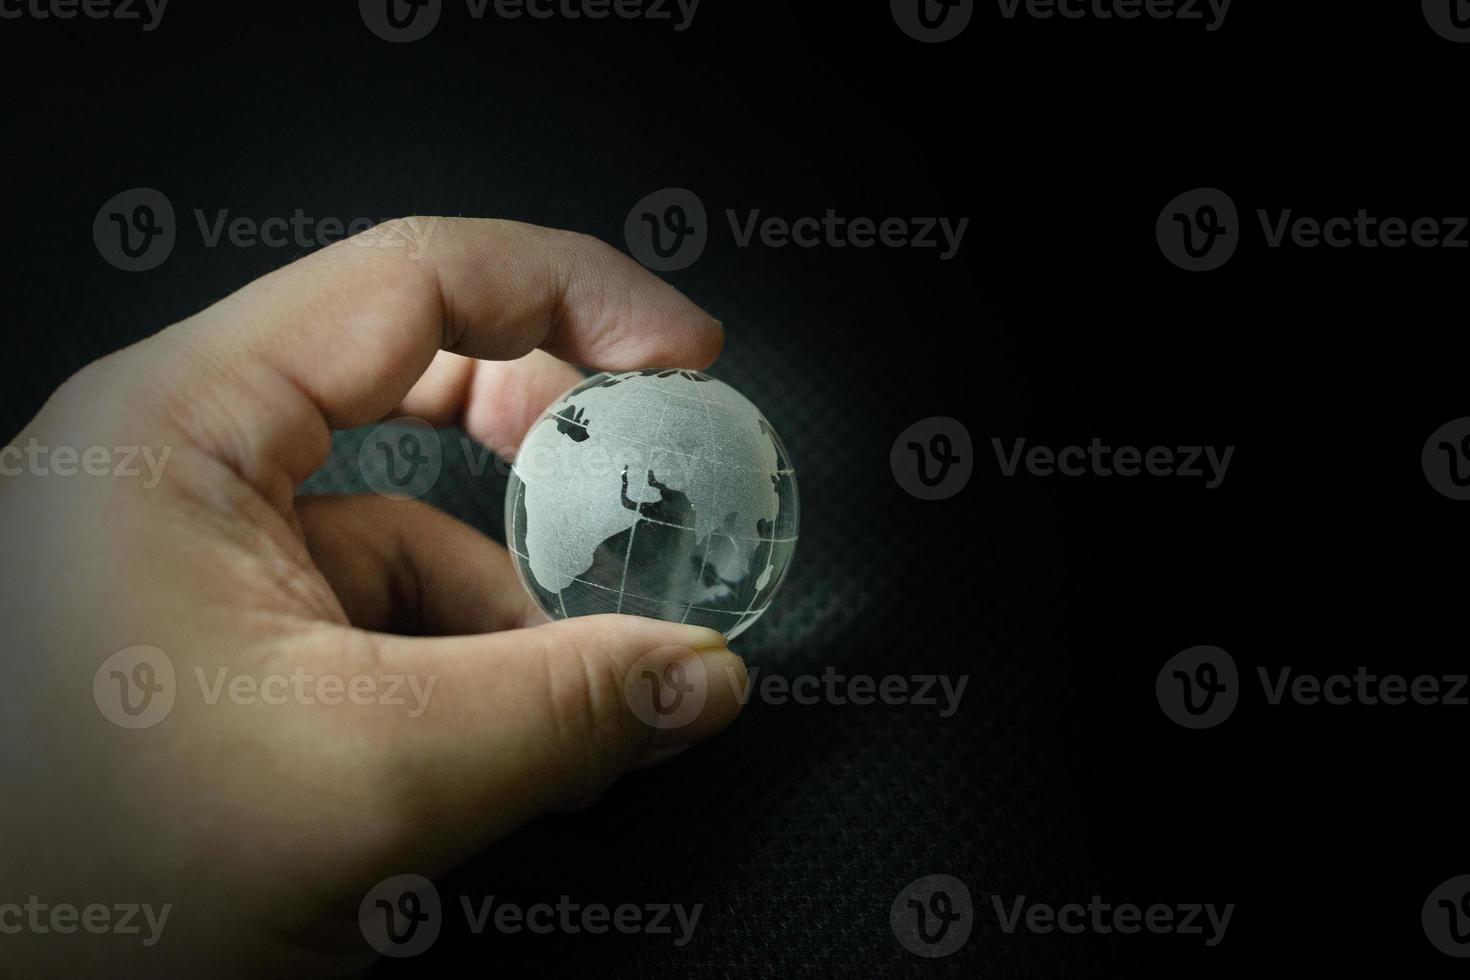 The glass ball planet earth and hand image. photo